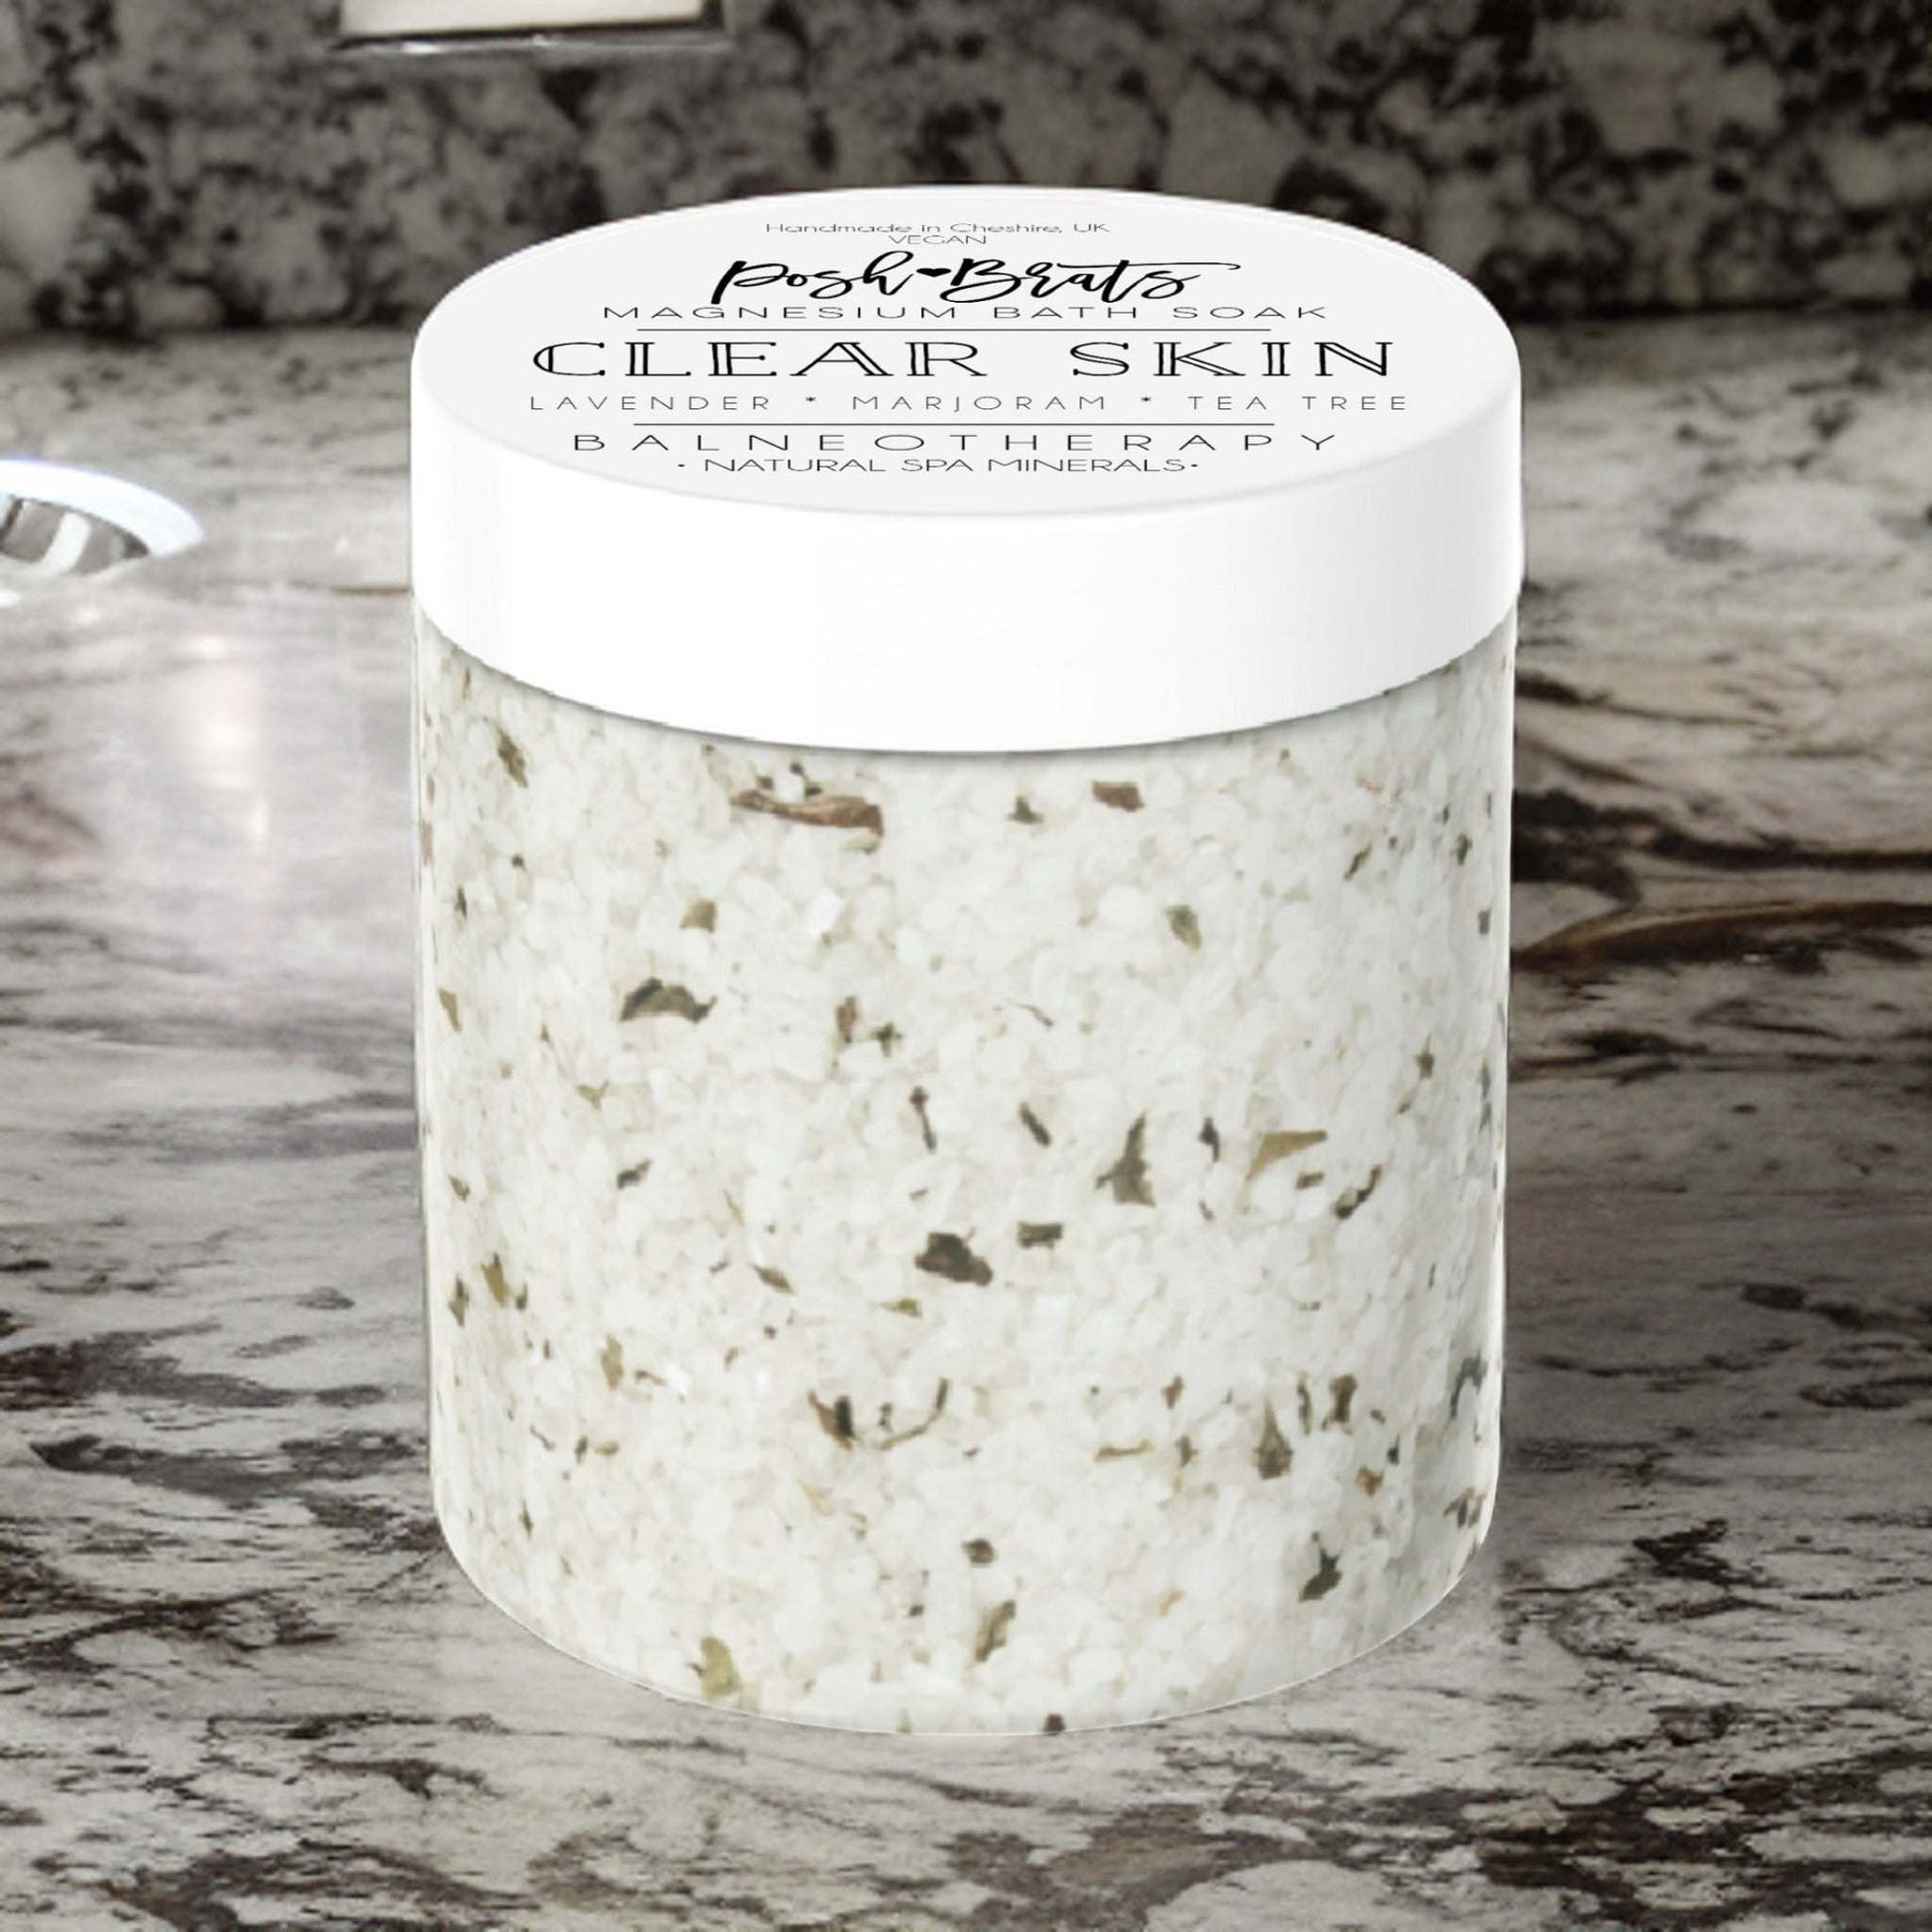 Immerse in the benefits of Clear Skin Bath Salt! Our Magnesium Aromatherapy Soak is your answer to radiant skin.